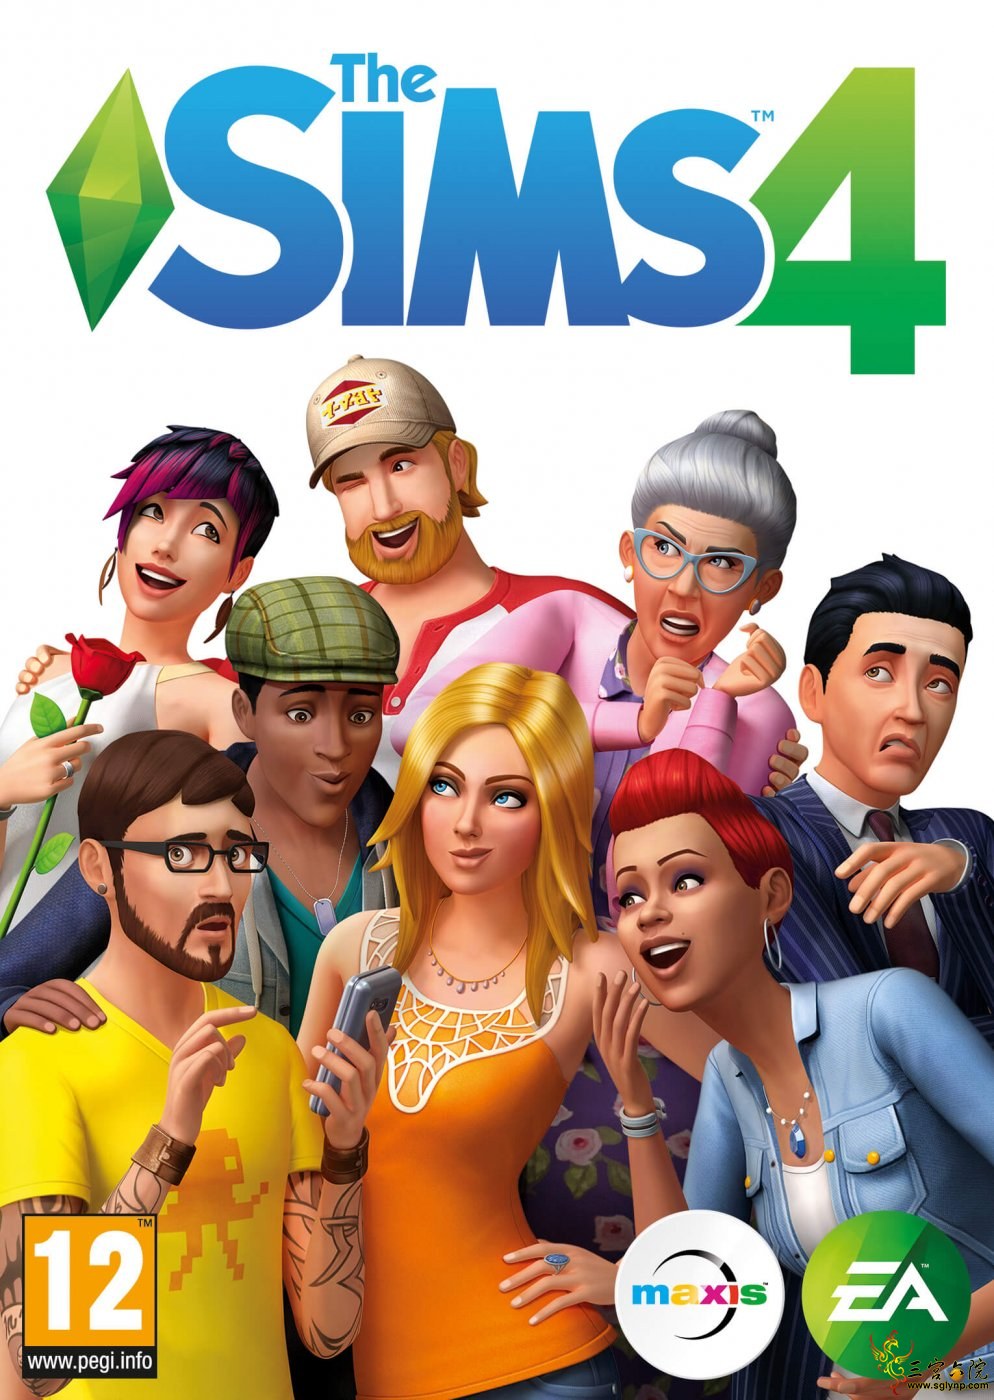 the-sims-4-base-game-official-boxart.jpg